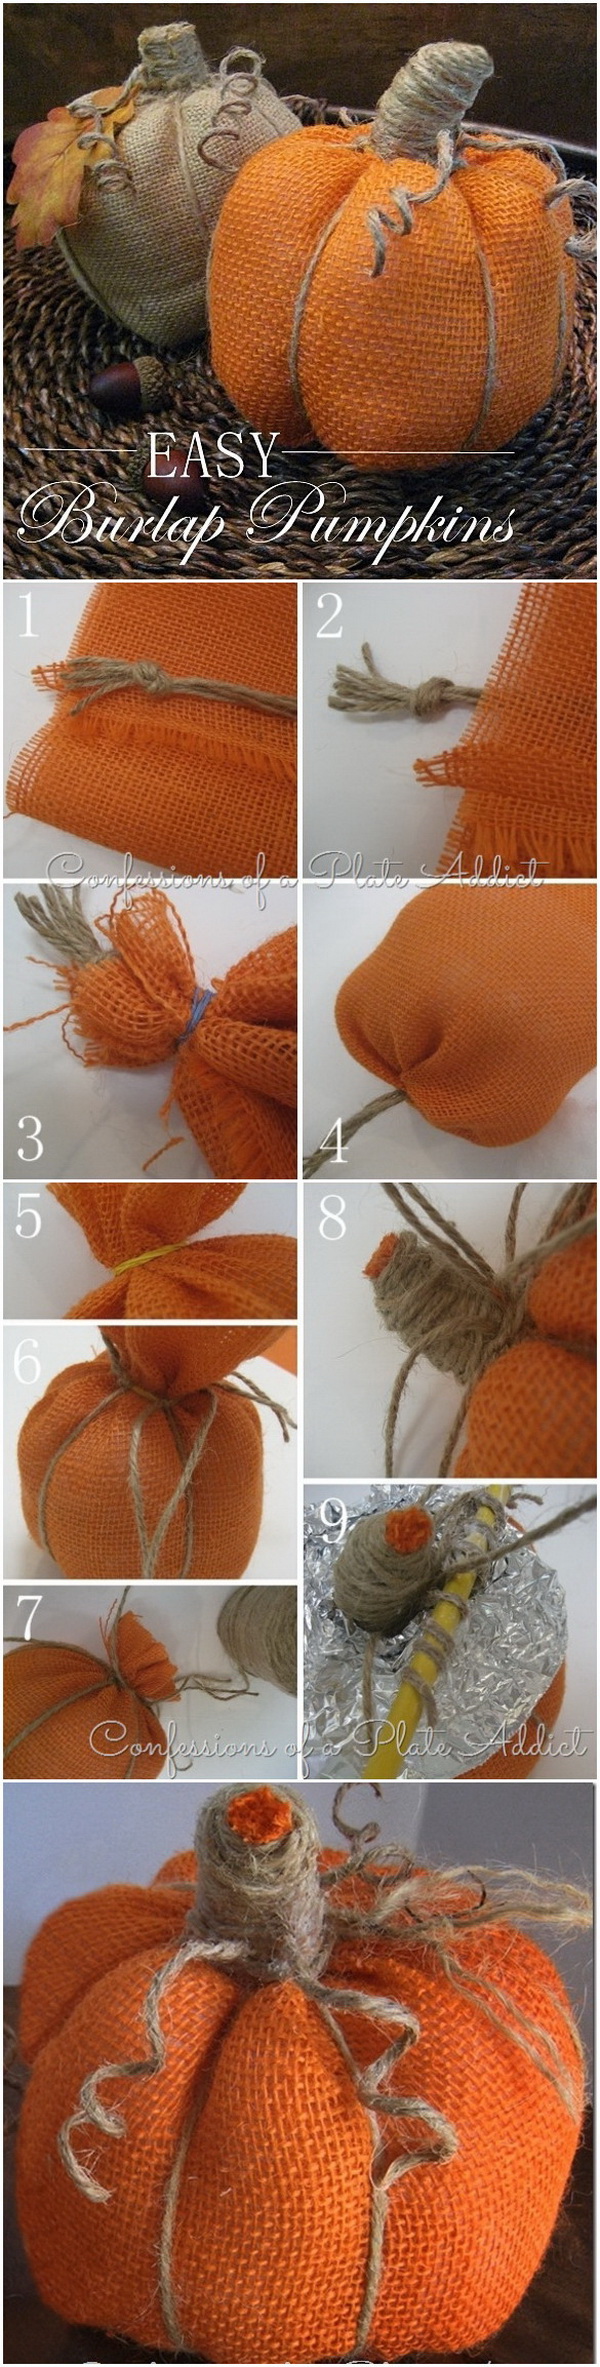 Easy No-Sew Burlap Pumpkins. These no-sew burlap pumpkins are super easy to make and fantatsic for farmhouse, rustic fall decorating. 